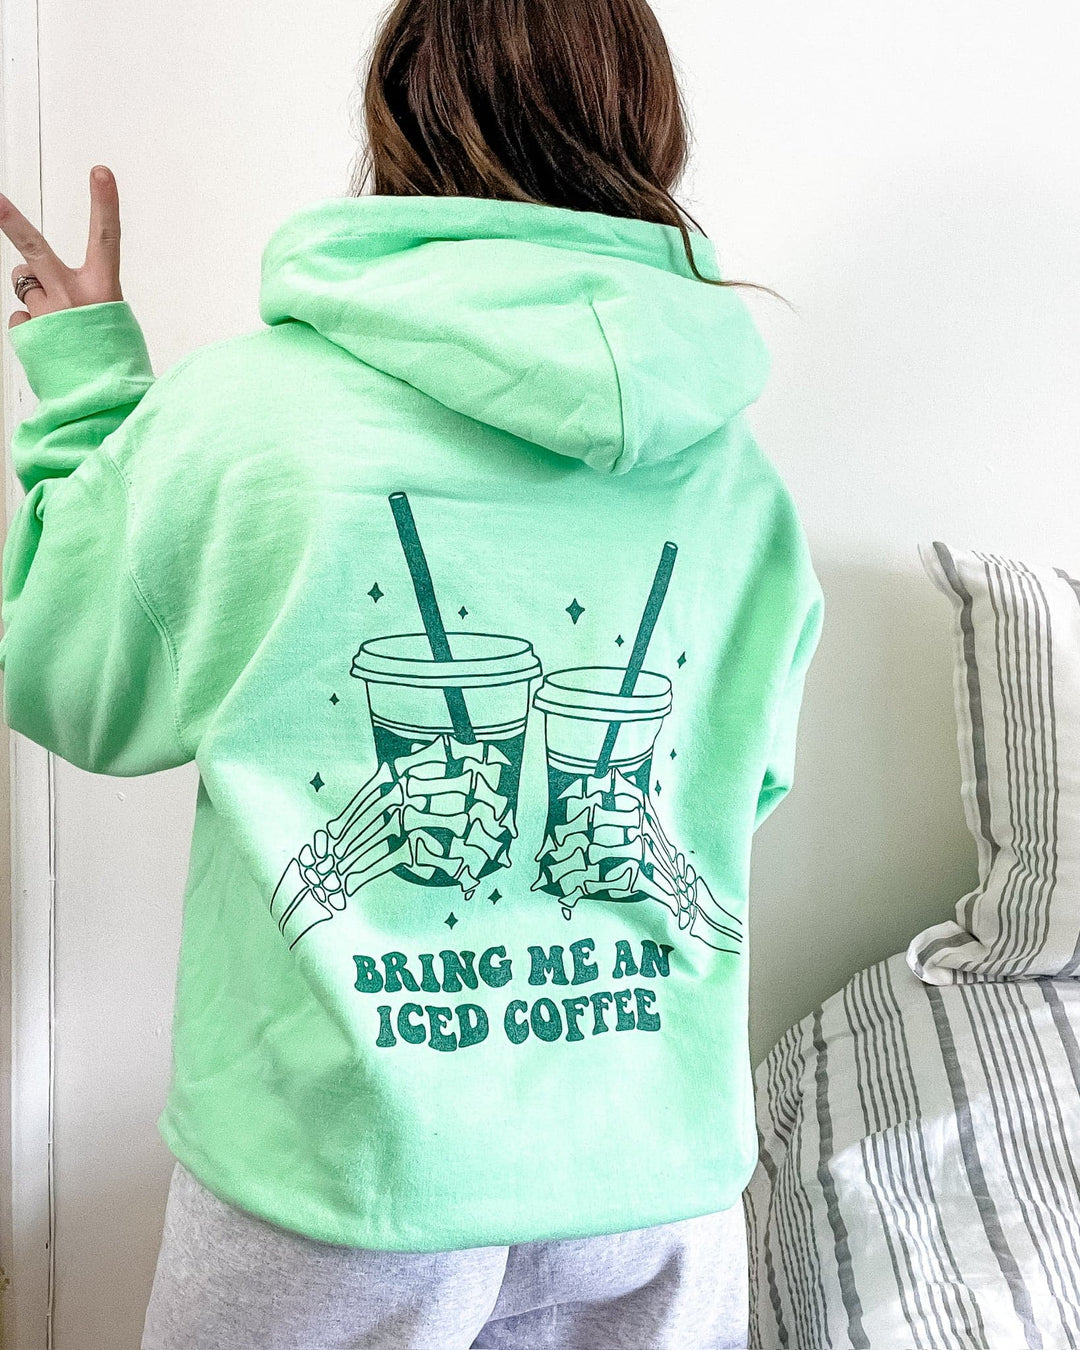 Bring Me An Iced Coffee Hoodie - Mint with Forest Metallic Print